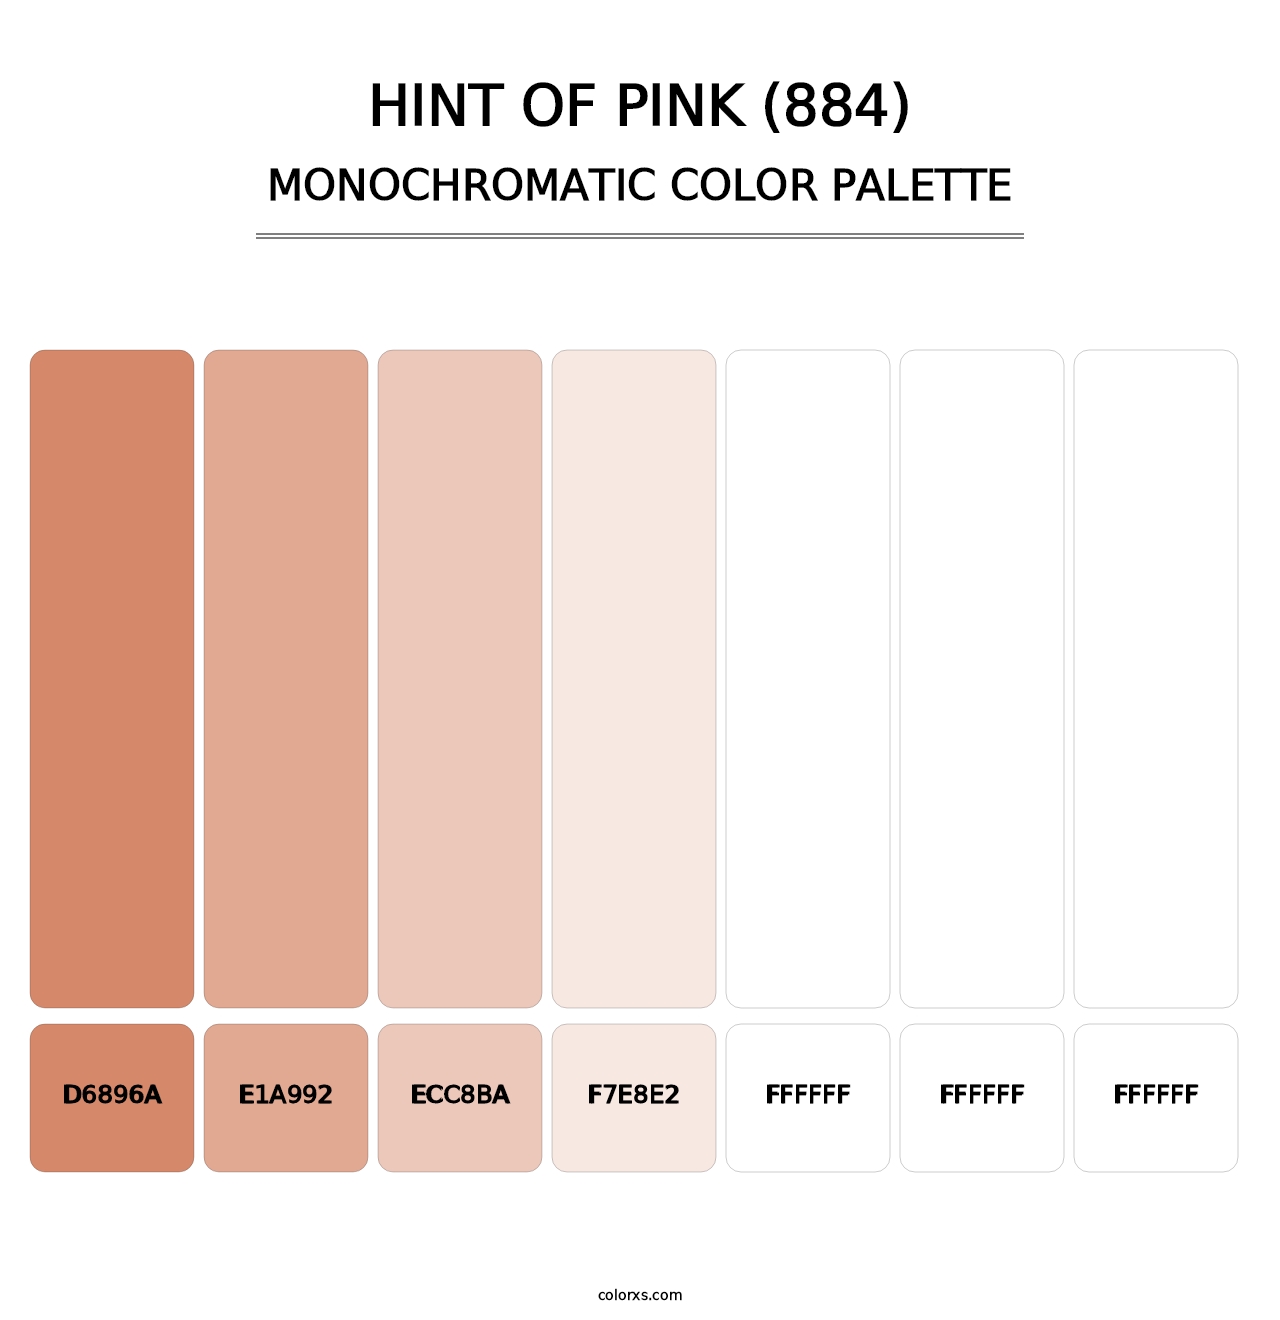 Hint of Pink (884) - Monochromatic Color Palette